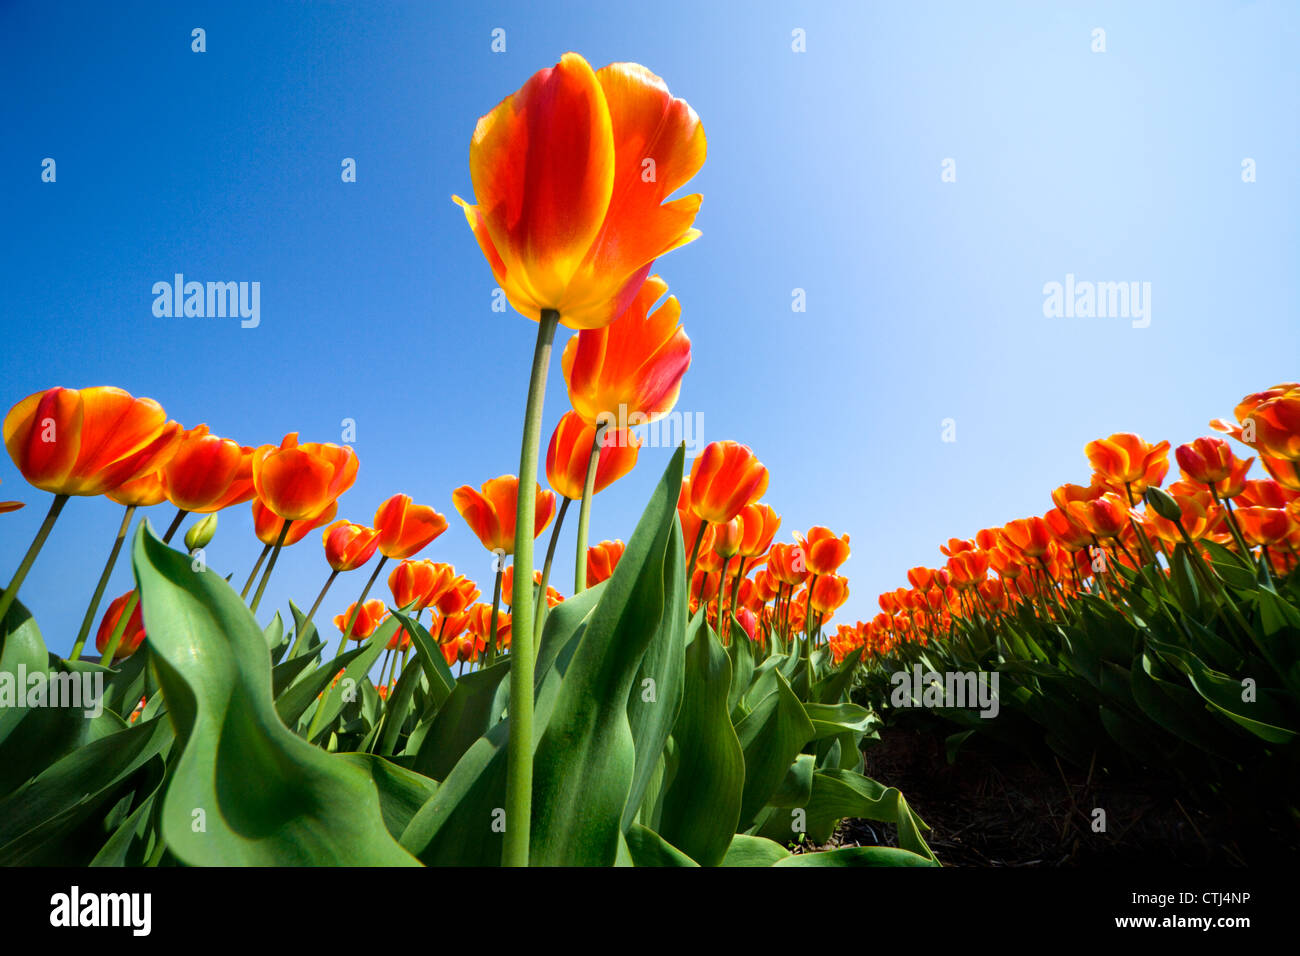 Holland tulips Netherlands tulips Dutch tulips Rows of vibrant orange yellow red tulips in a field Stock Photo